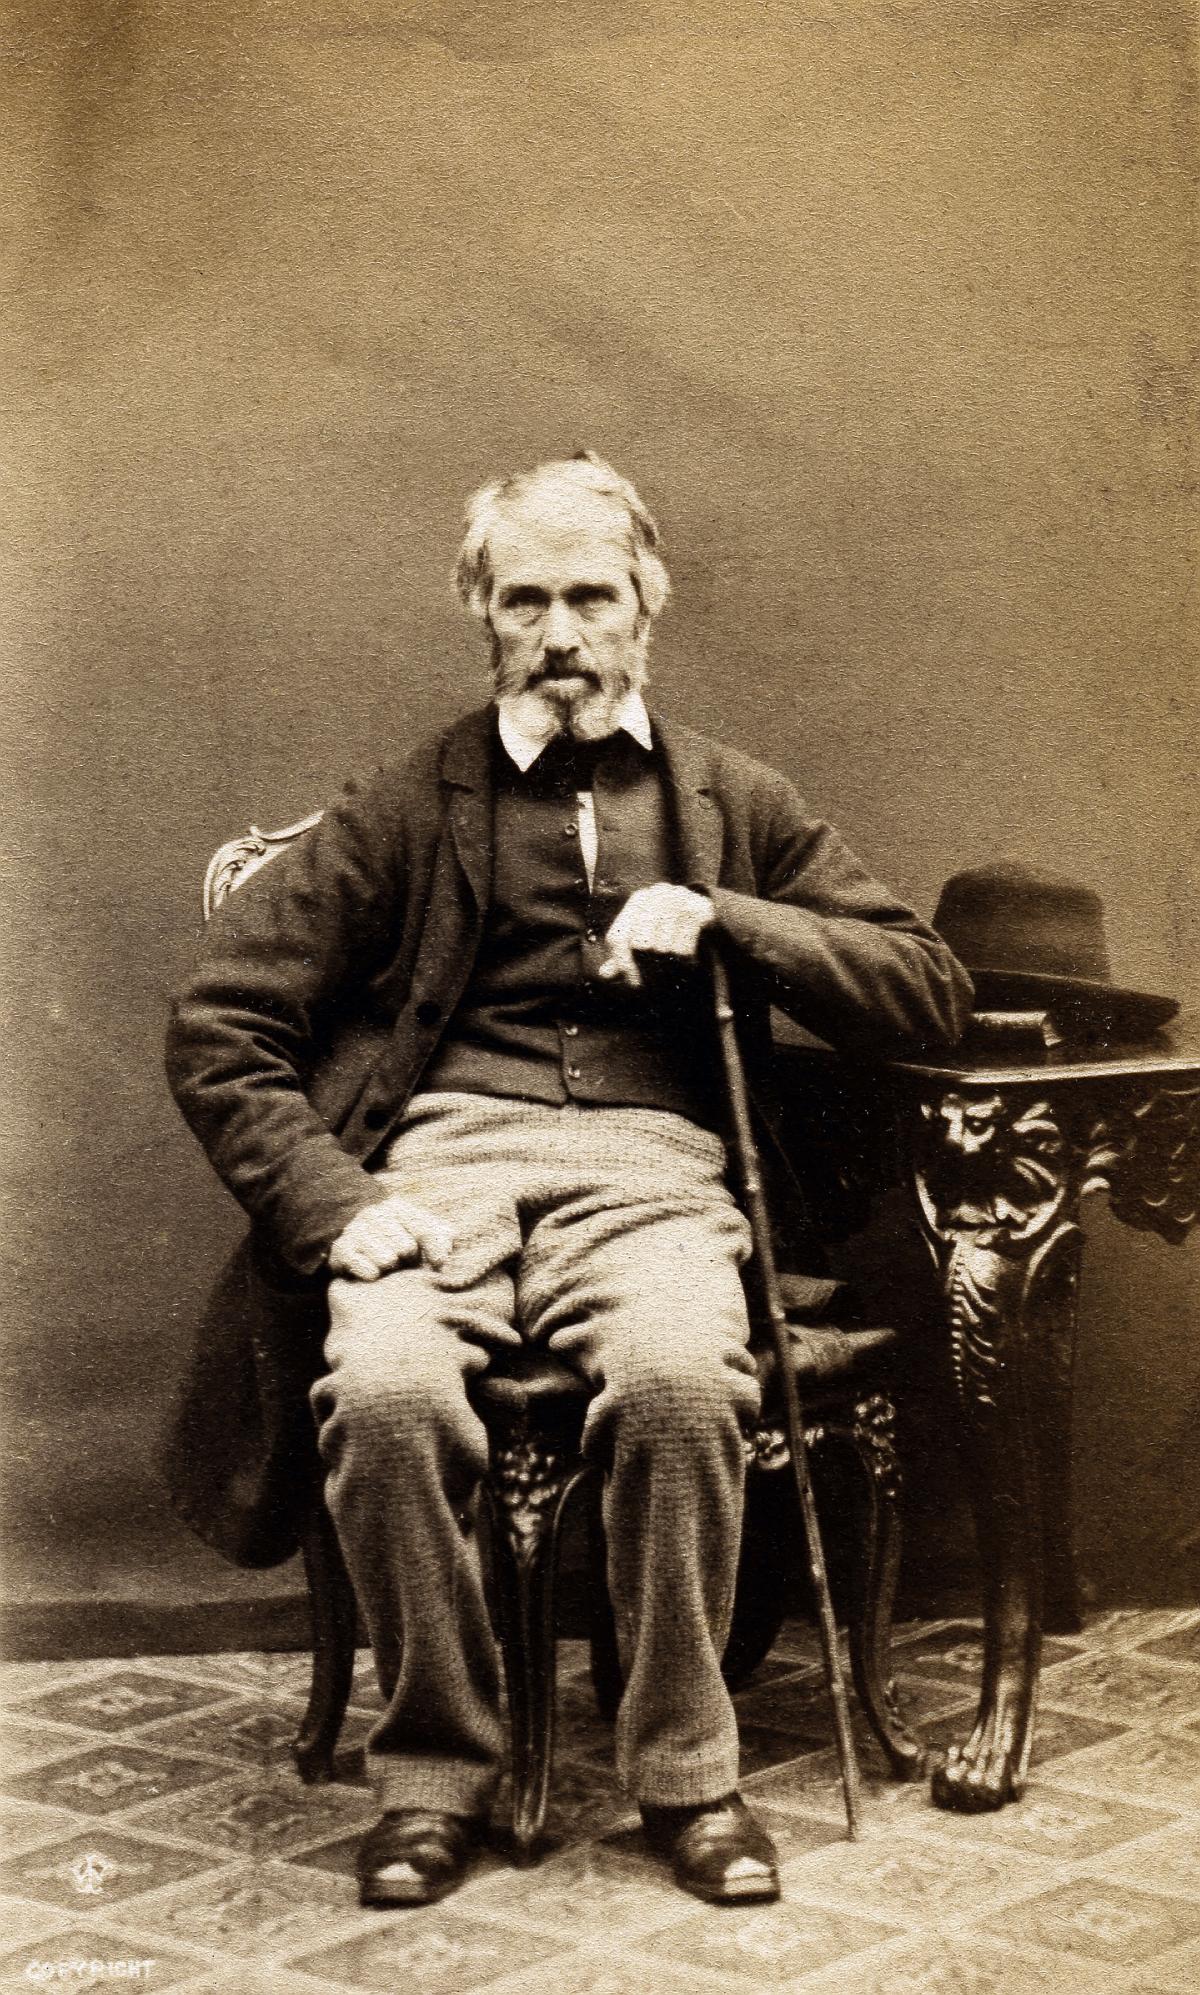 Carlyle sits, resting his left forearm on a walking stick, dressed in grey trousers and a dark coat, his hat sitting on a side table on his left